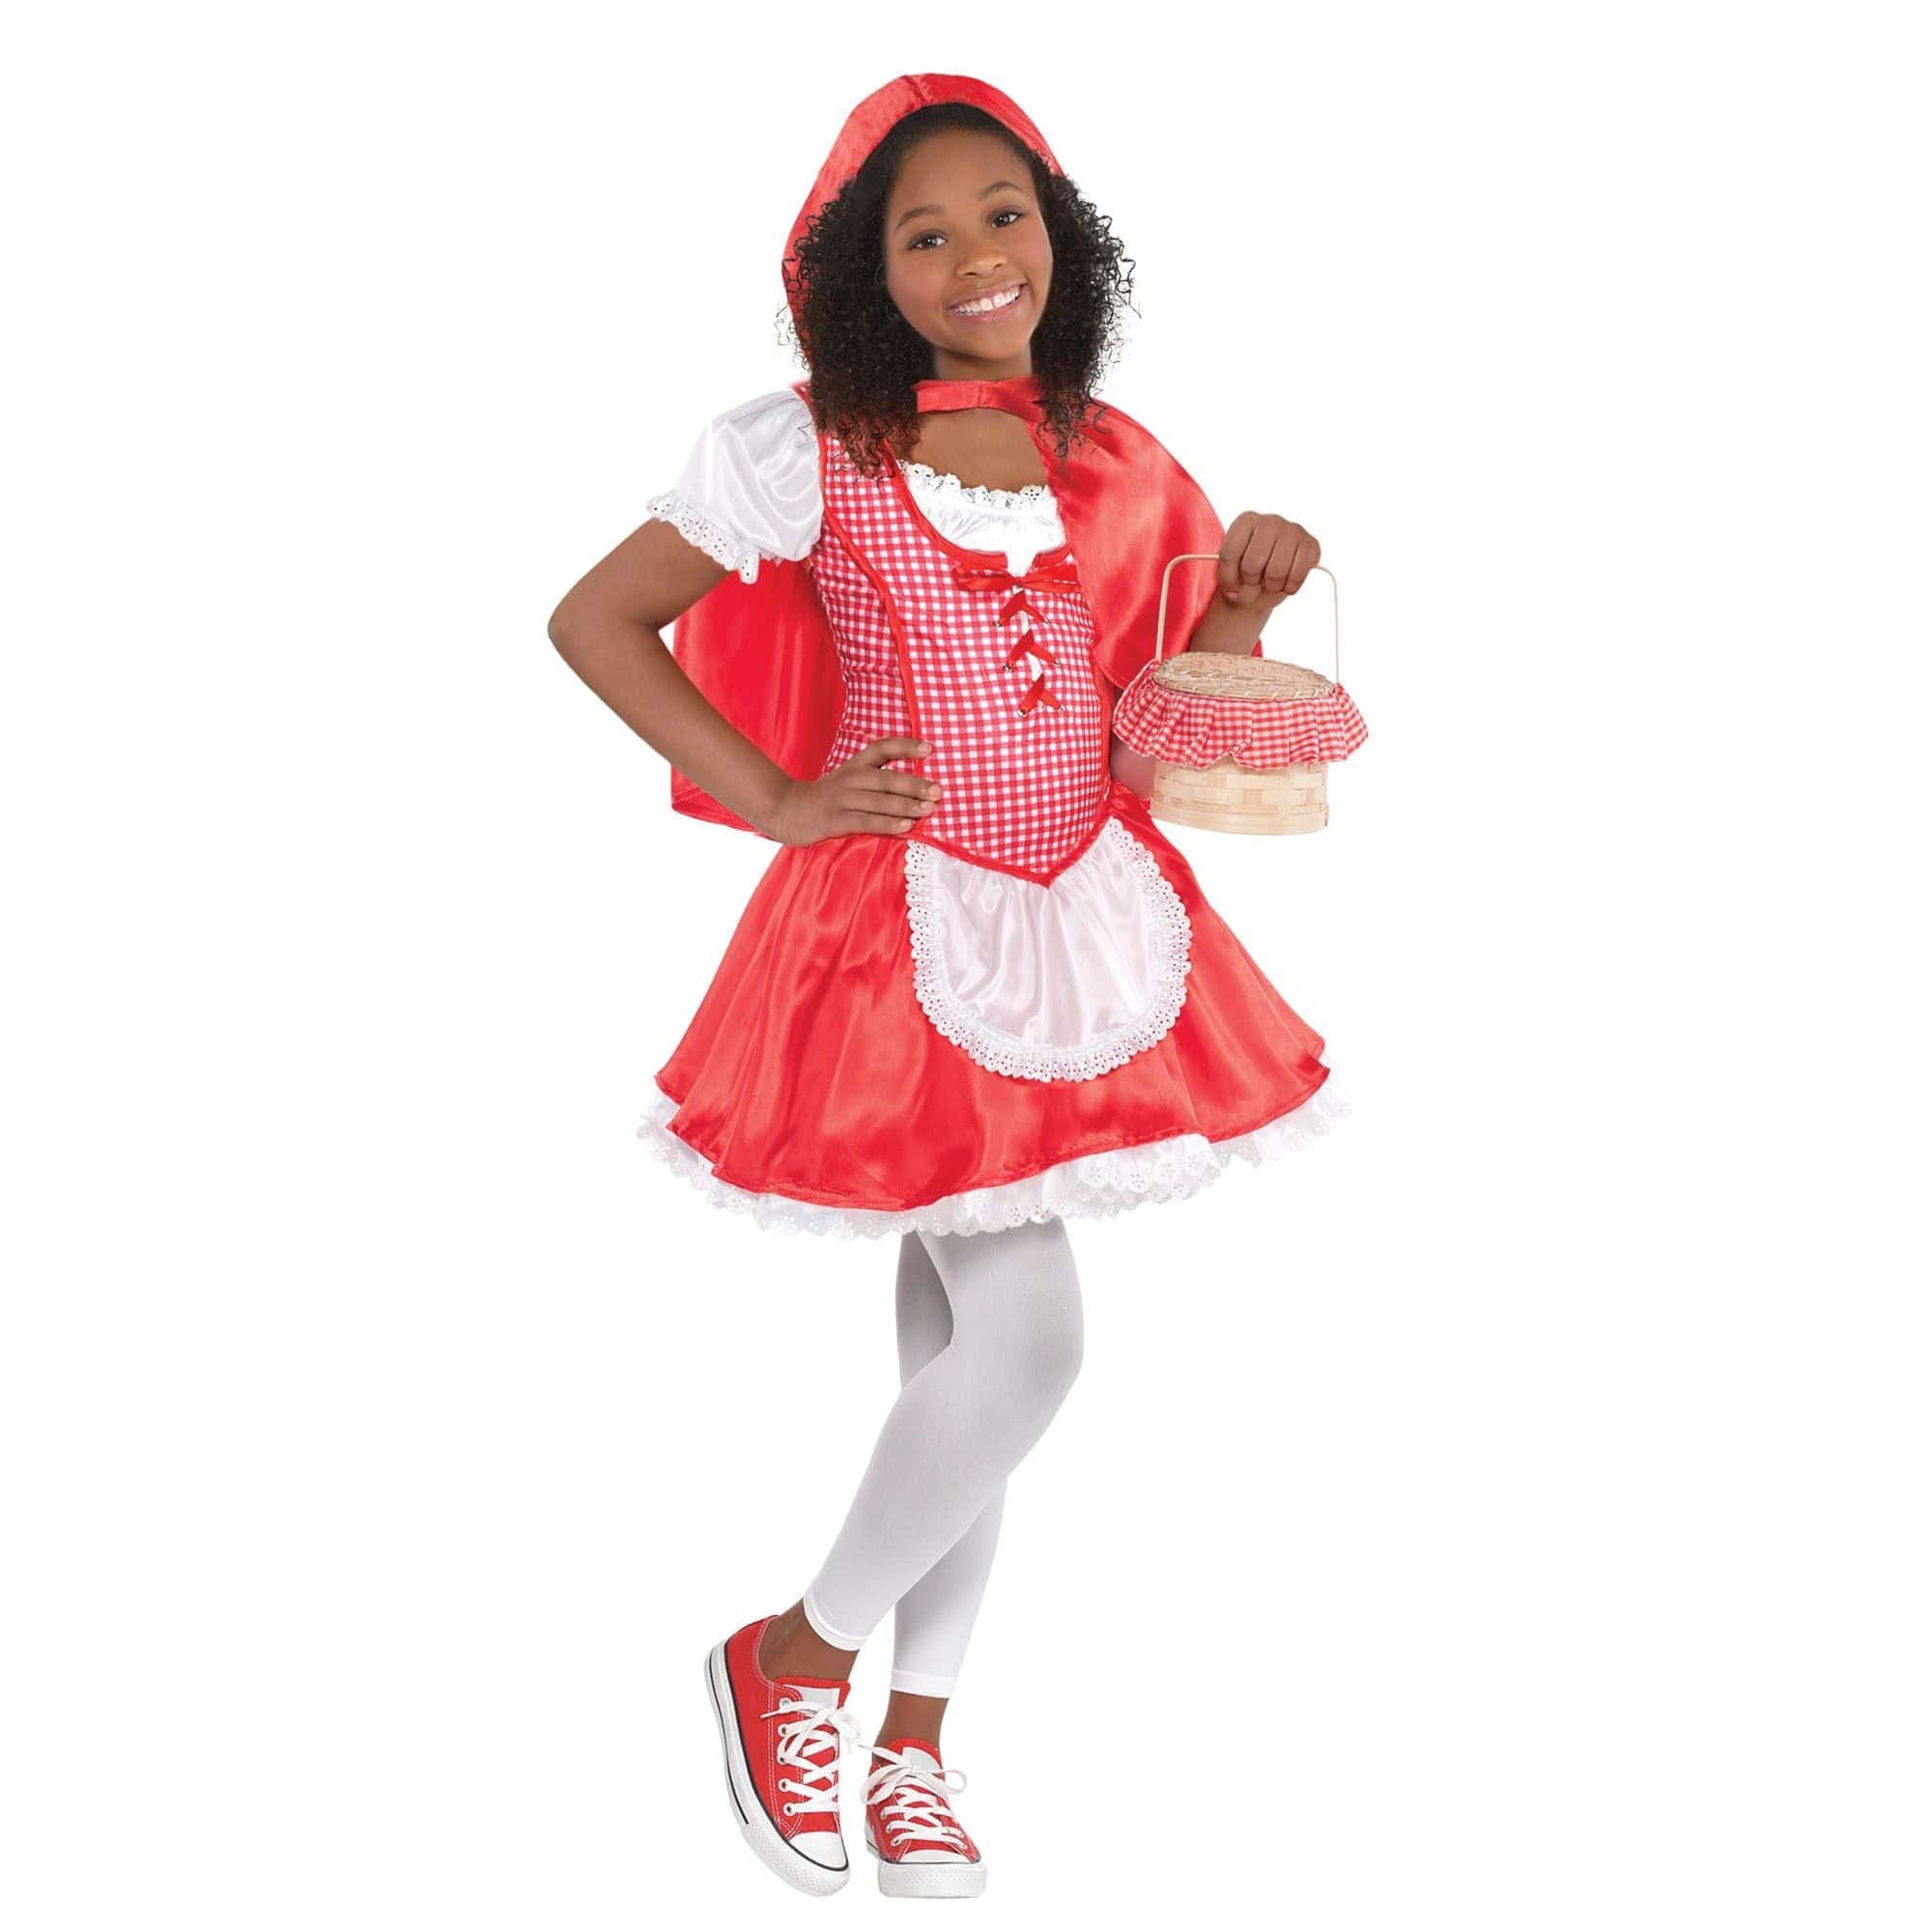 Amscan COSTUMES Small (4-6) Lil' Red Riding Hood